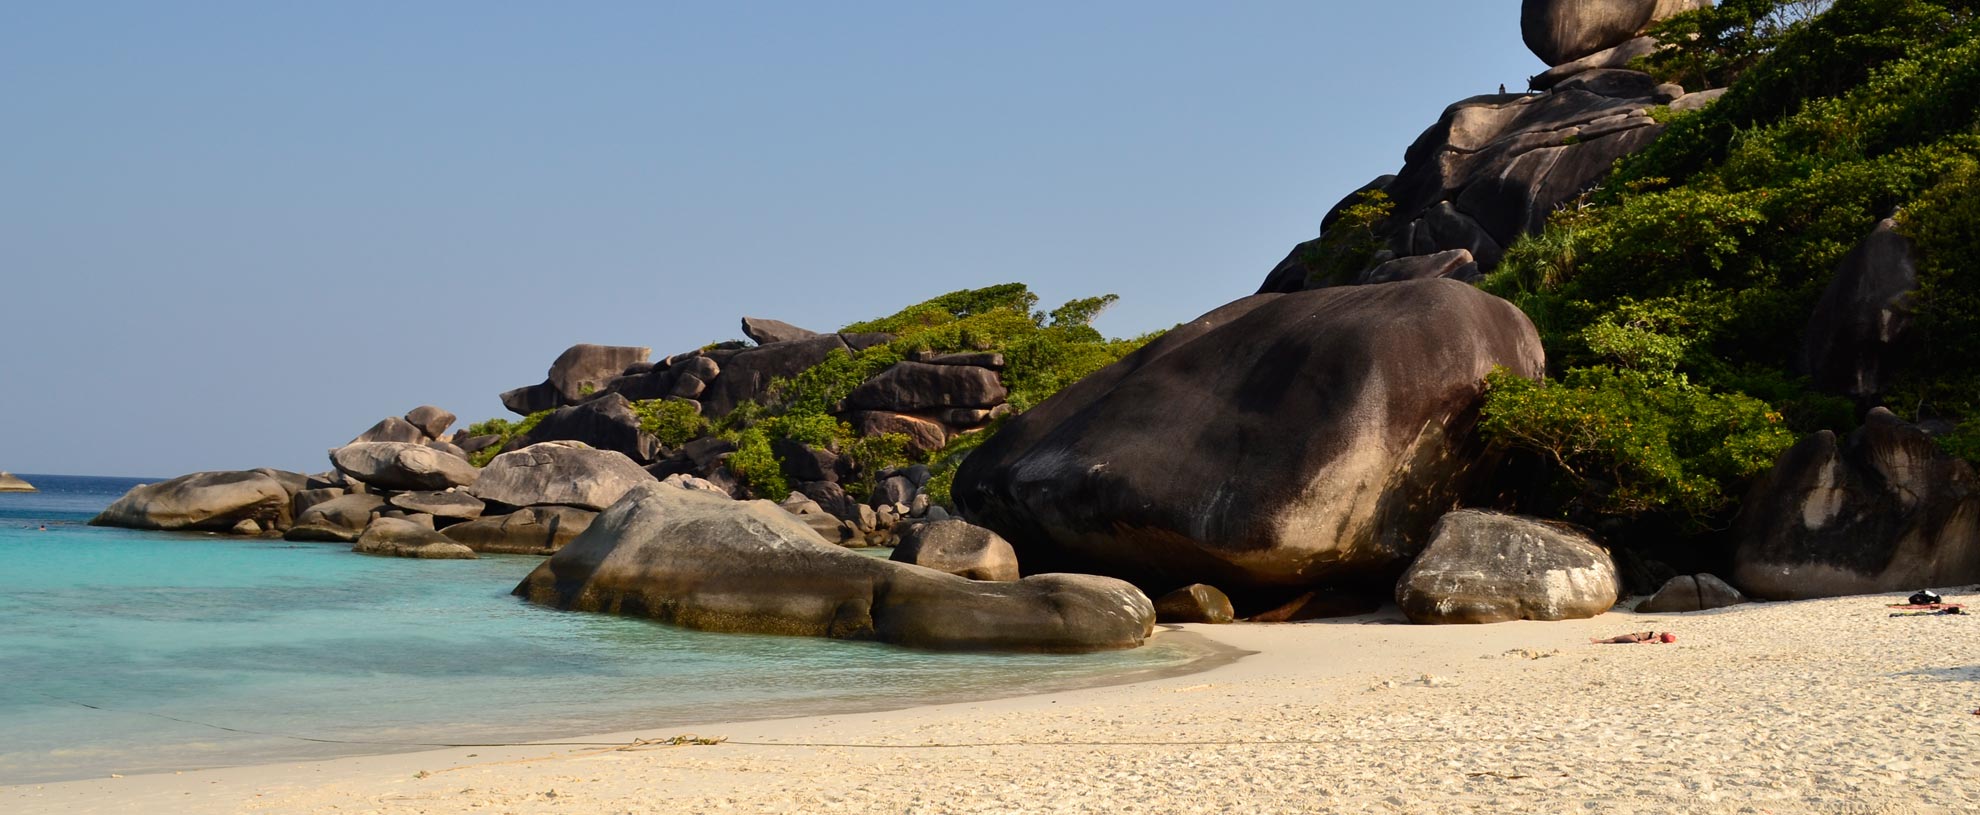 Sandy beach at Donald Duck bay in the Similan Islands